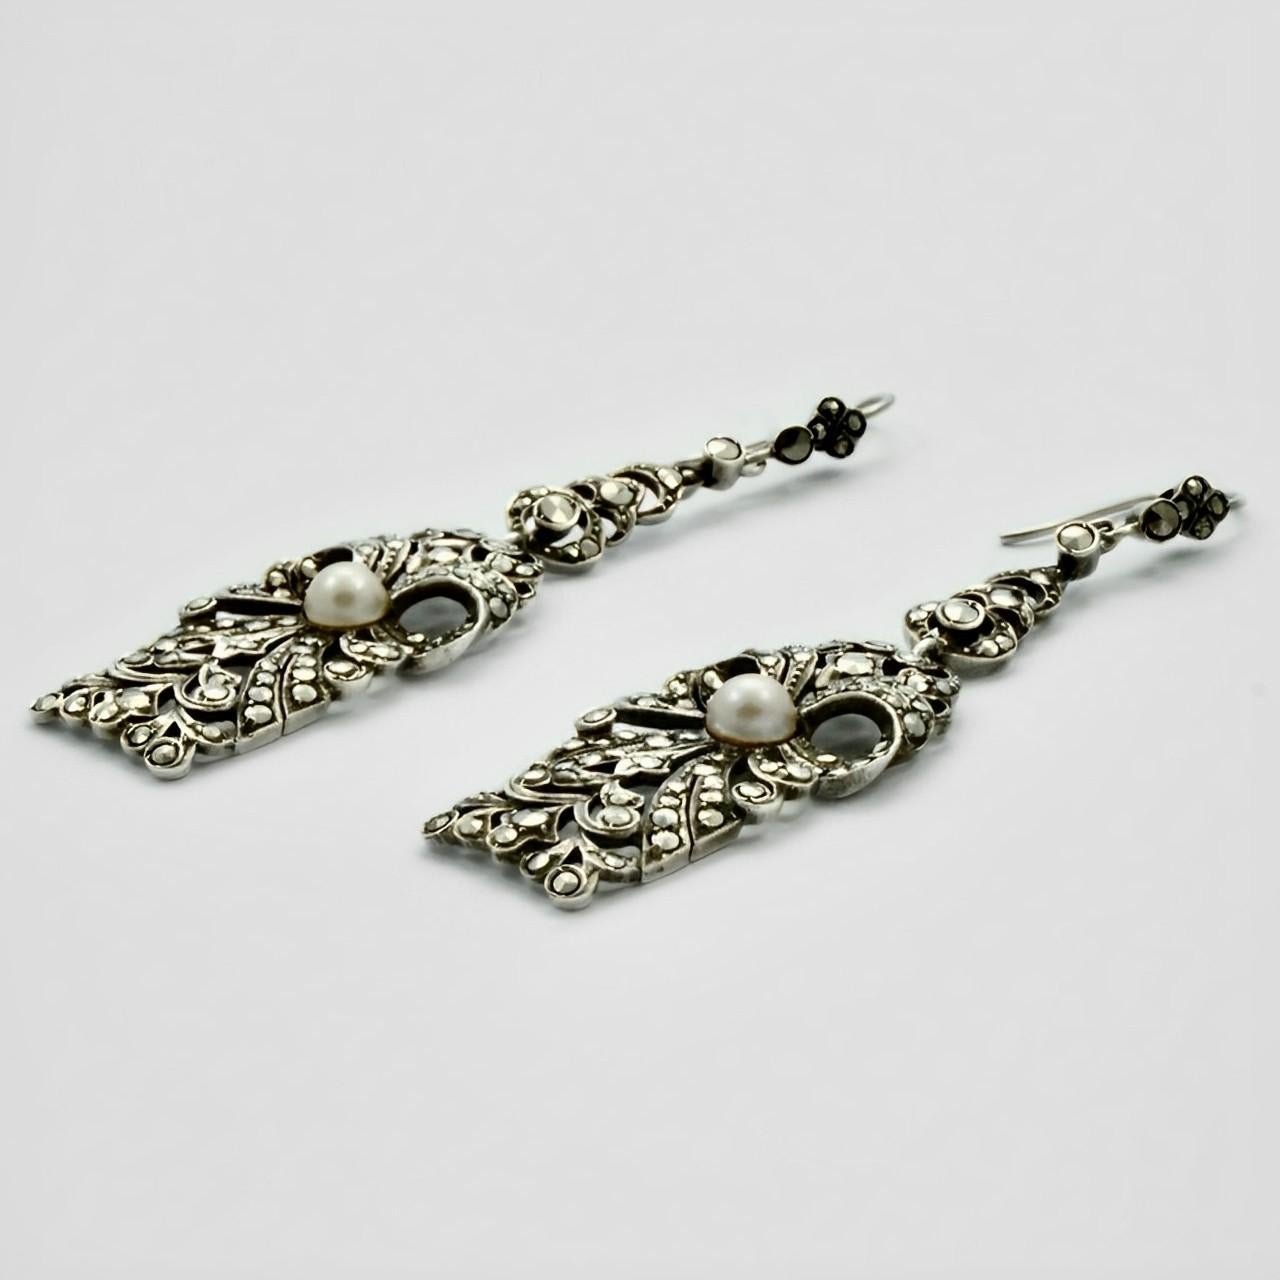 Round Cut Art Deco Silver and Marcasite Earrings set with Mabe Cultured Pearls circa 1920s For Sale